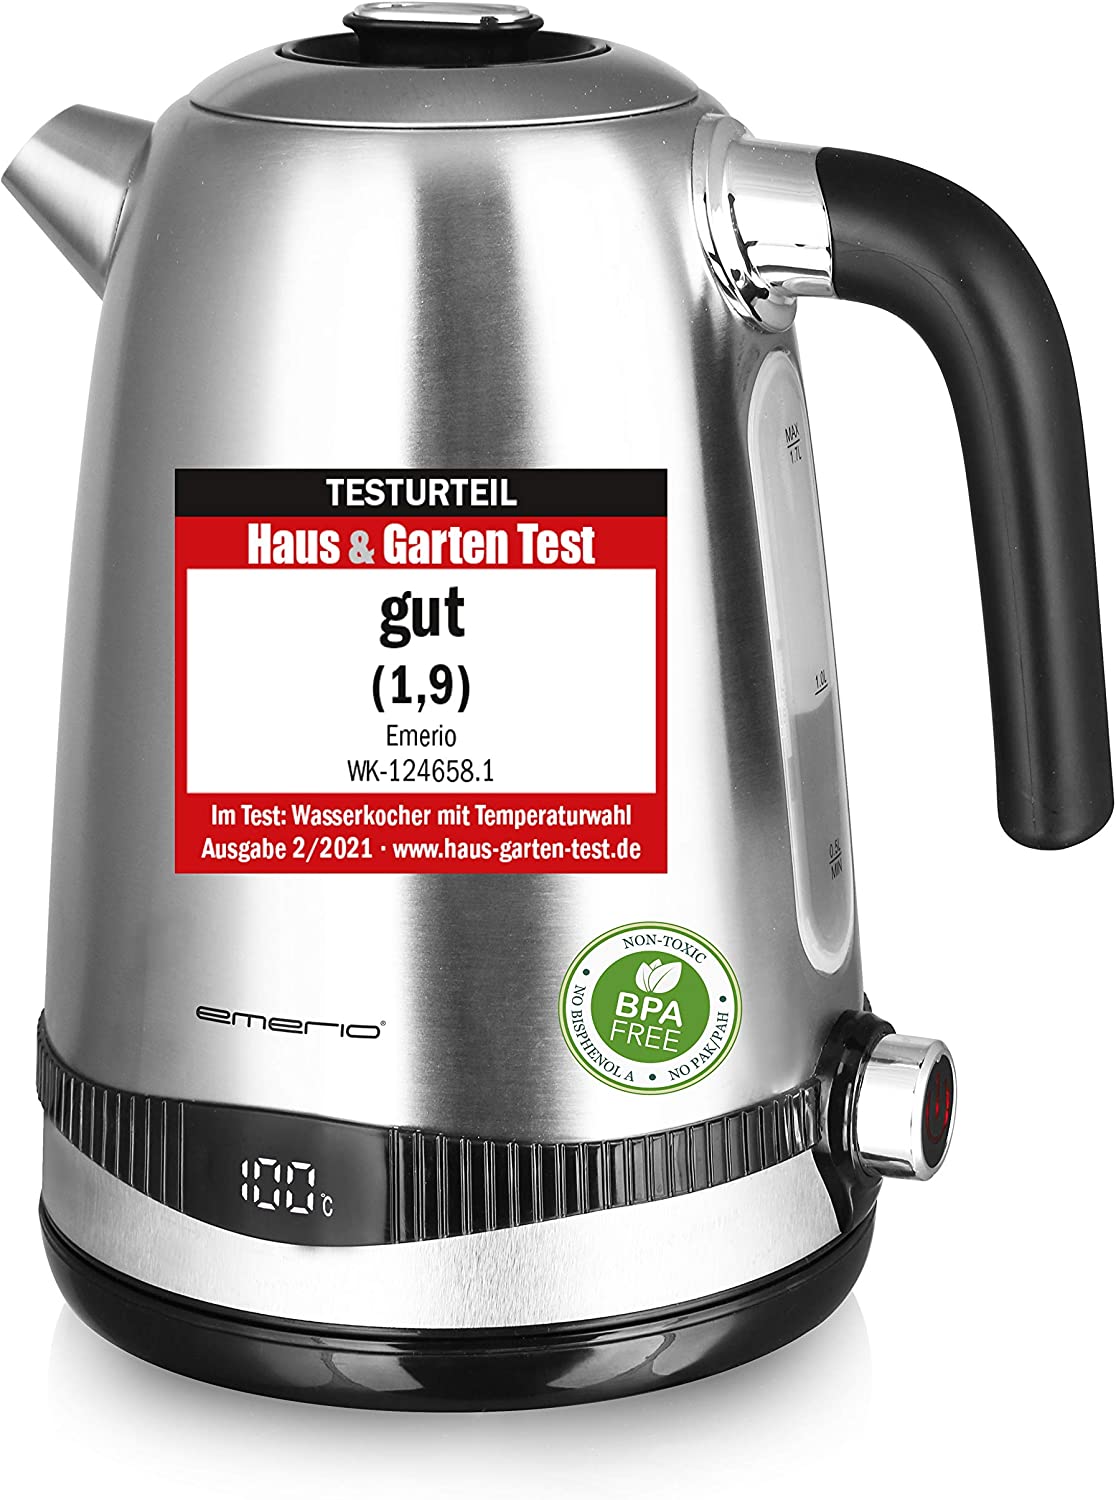 Emerio WK-124658.1 Stainless Steel Kettle, 1.7 Litres, 2200 Watt, Temperature Selection [40°, 50°, 60°, 70°, 80°, 90°, 100°C], 360° Base, Keep Warm Function, Display with Temperature Display with Temperature Display, BPA Free. Silver